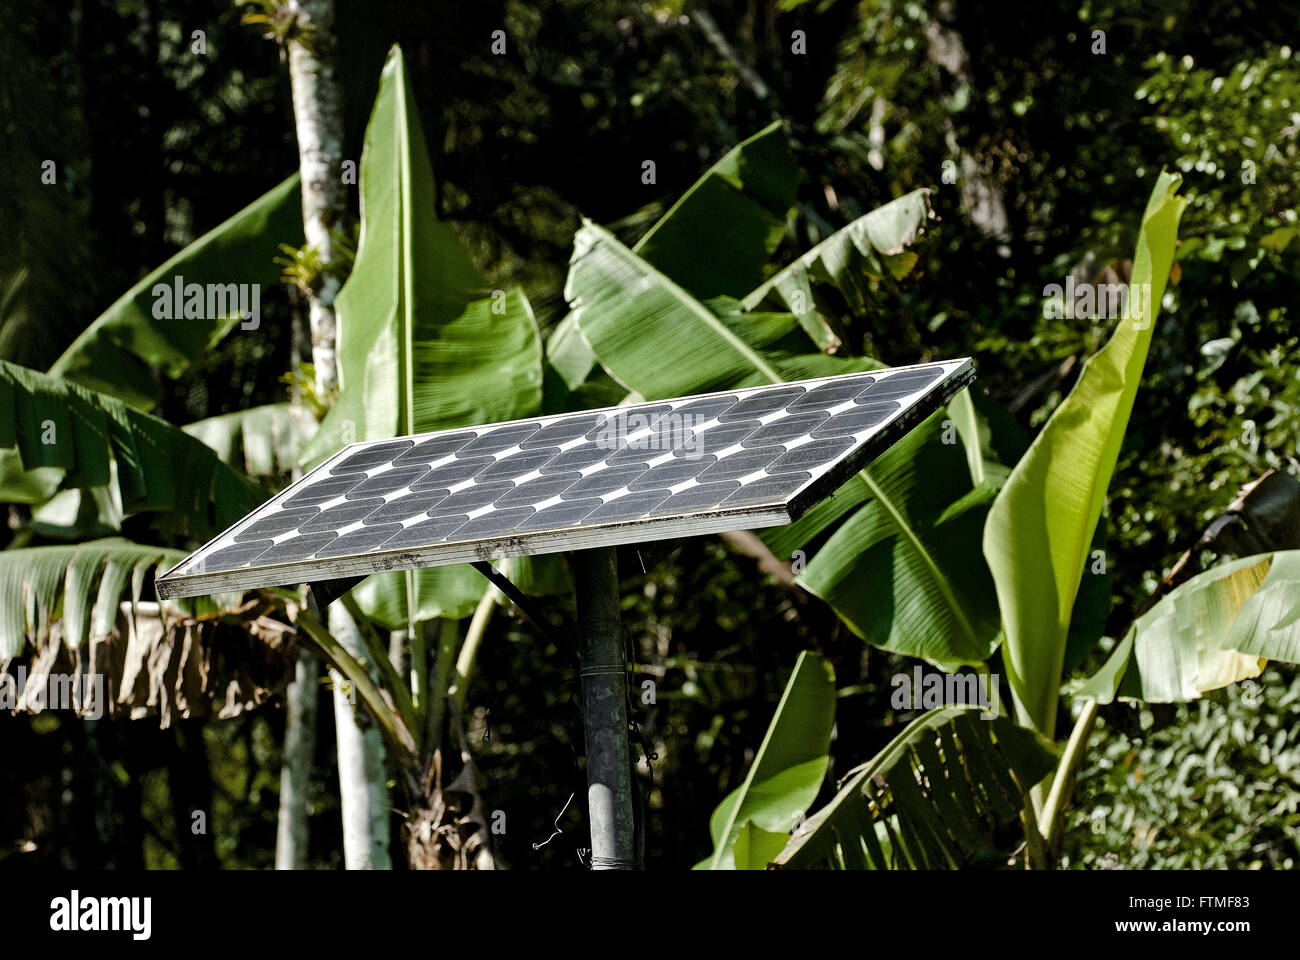 Solar panel Barbados Community in the Bay of Pines Stock Photo